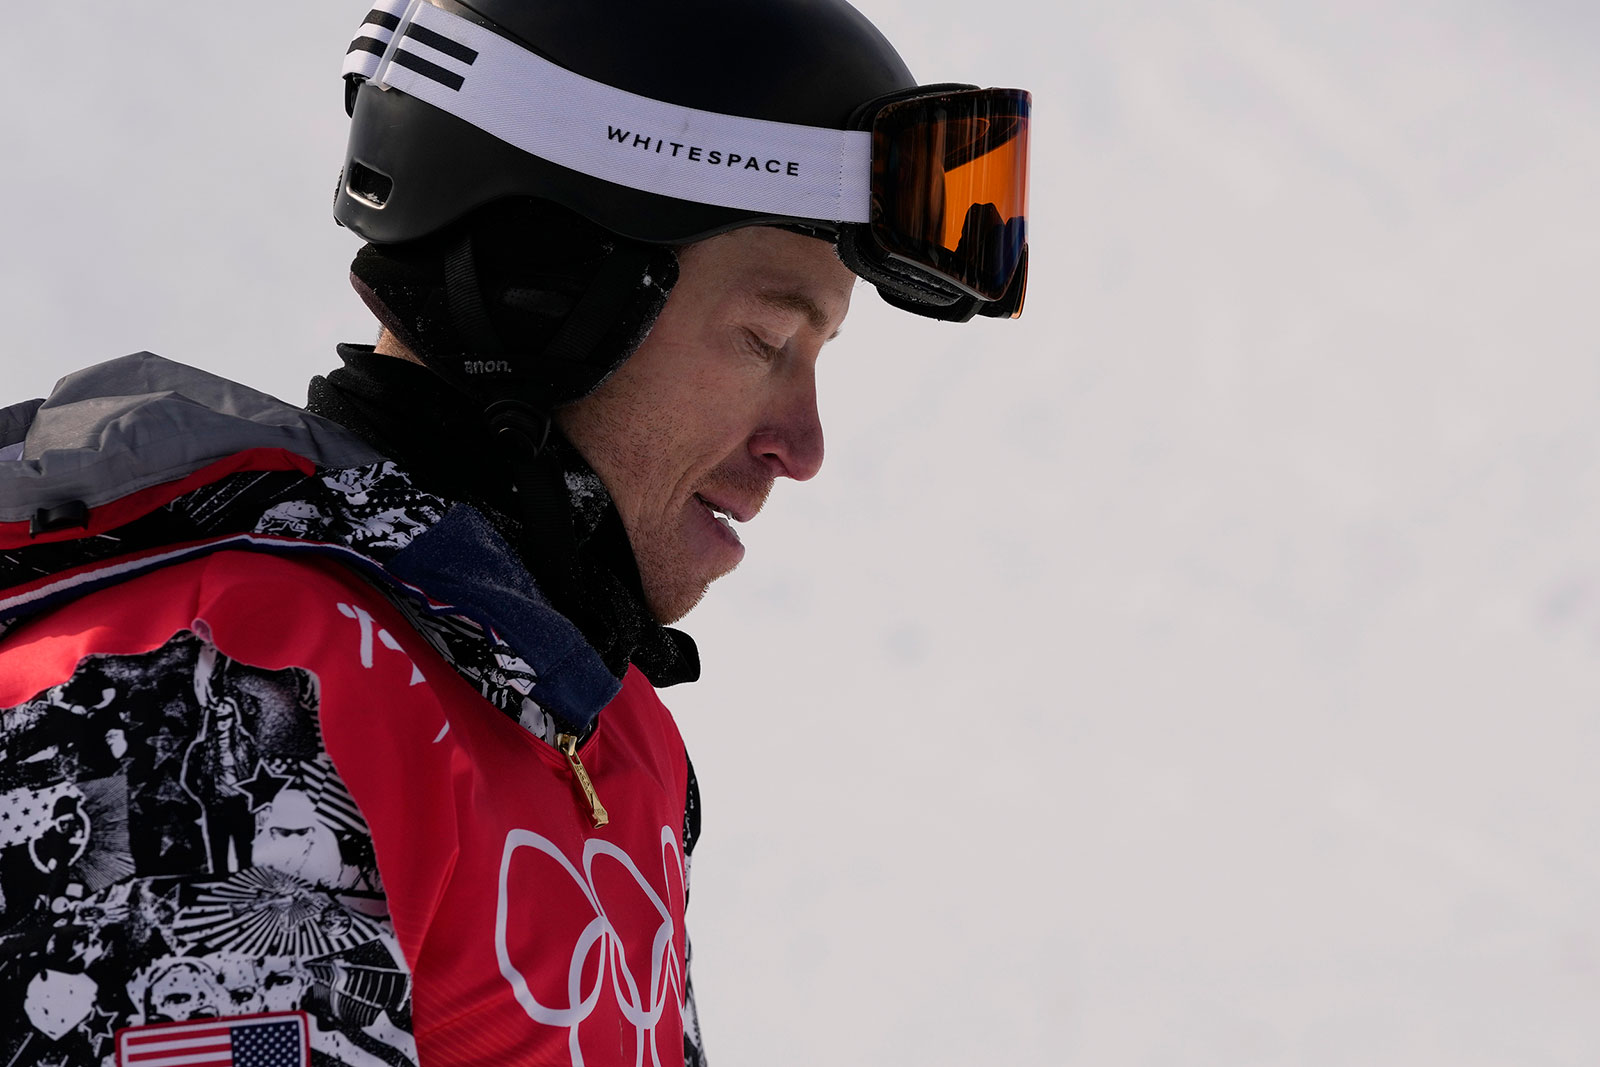 Snowboarding legend Shaun White is making his last Olympic appearance at Beijing 2022.